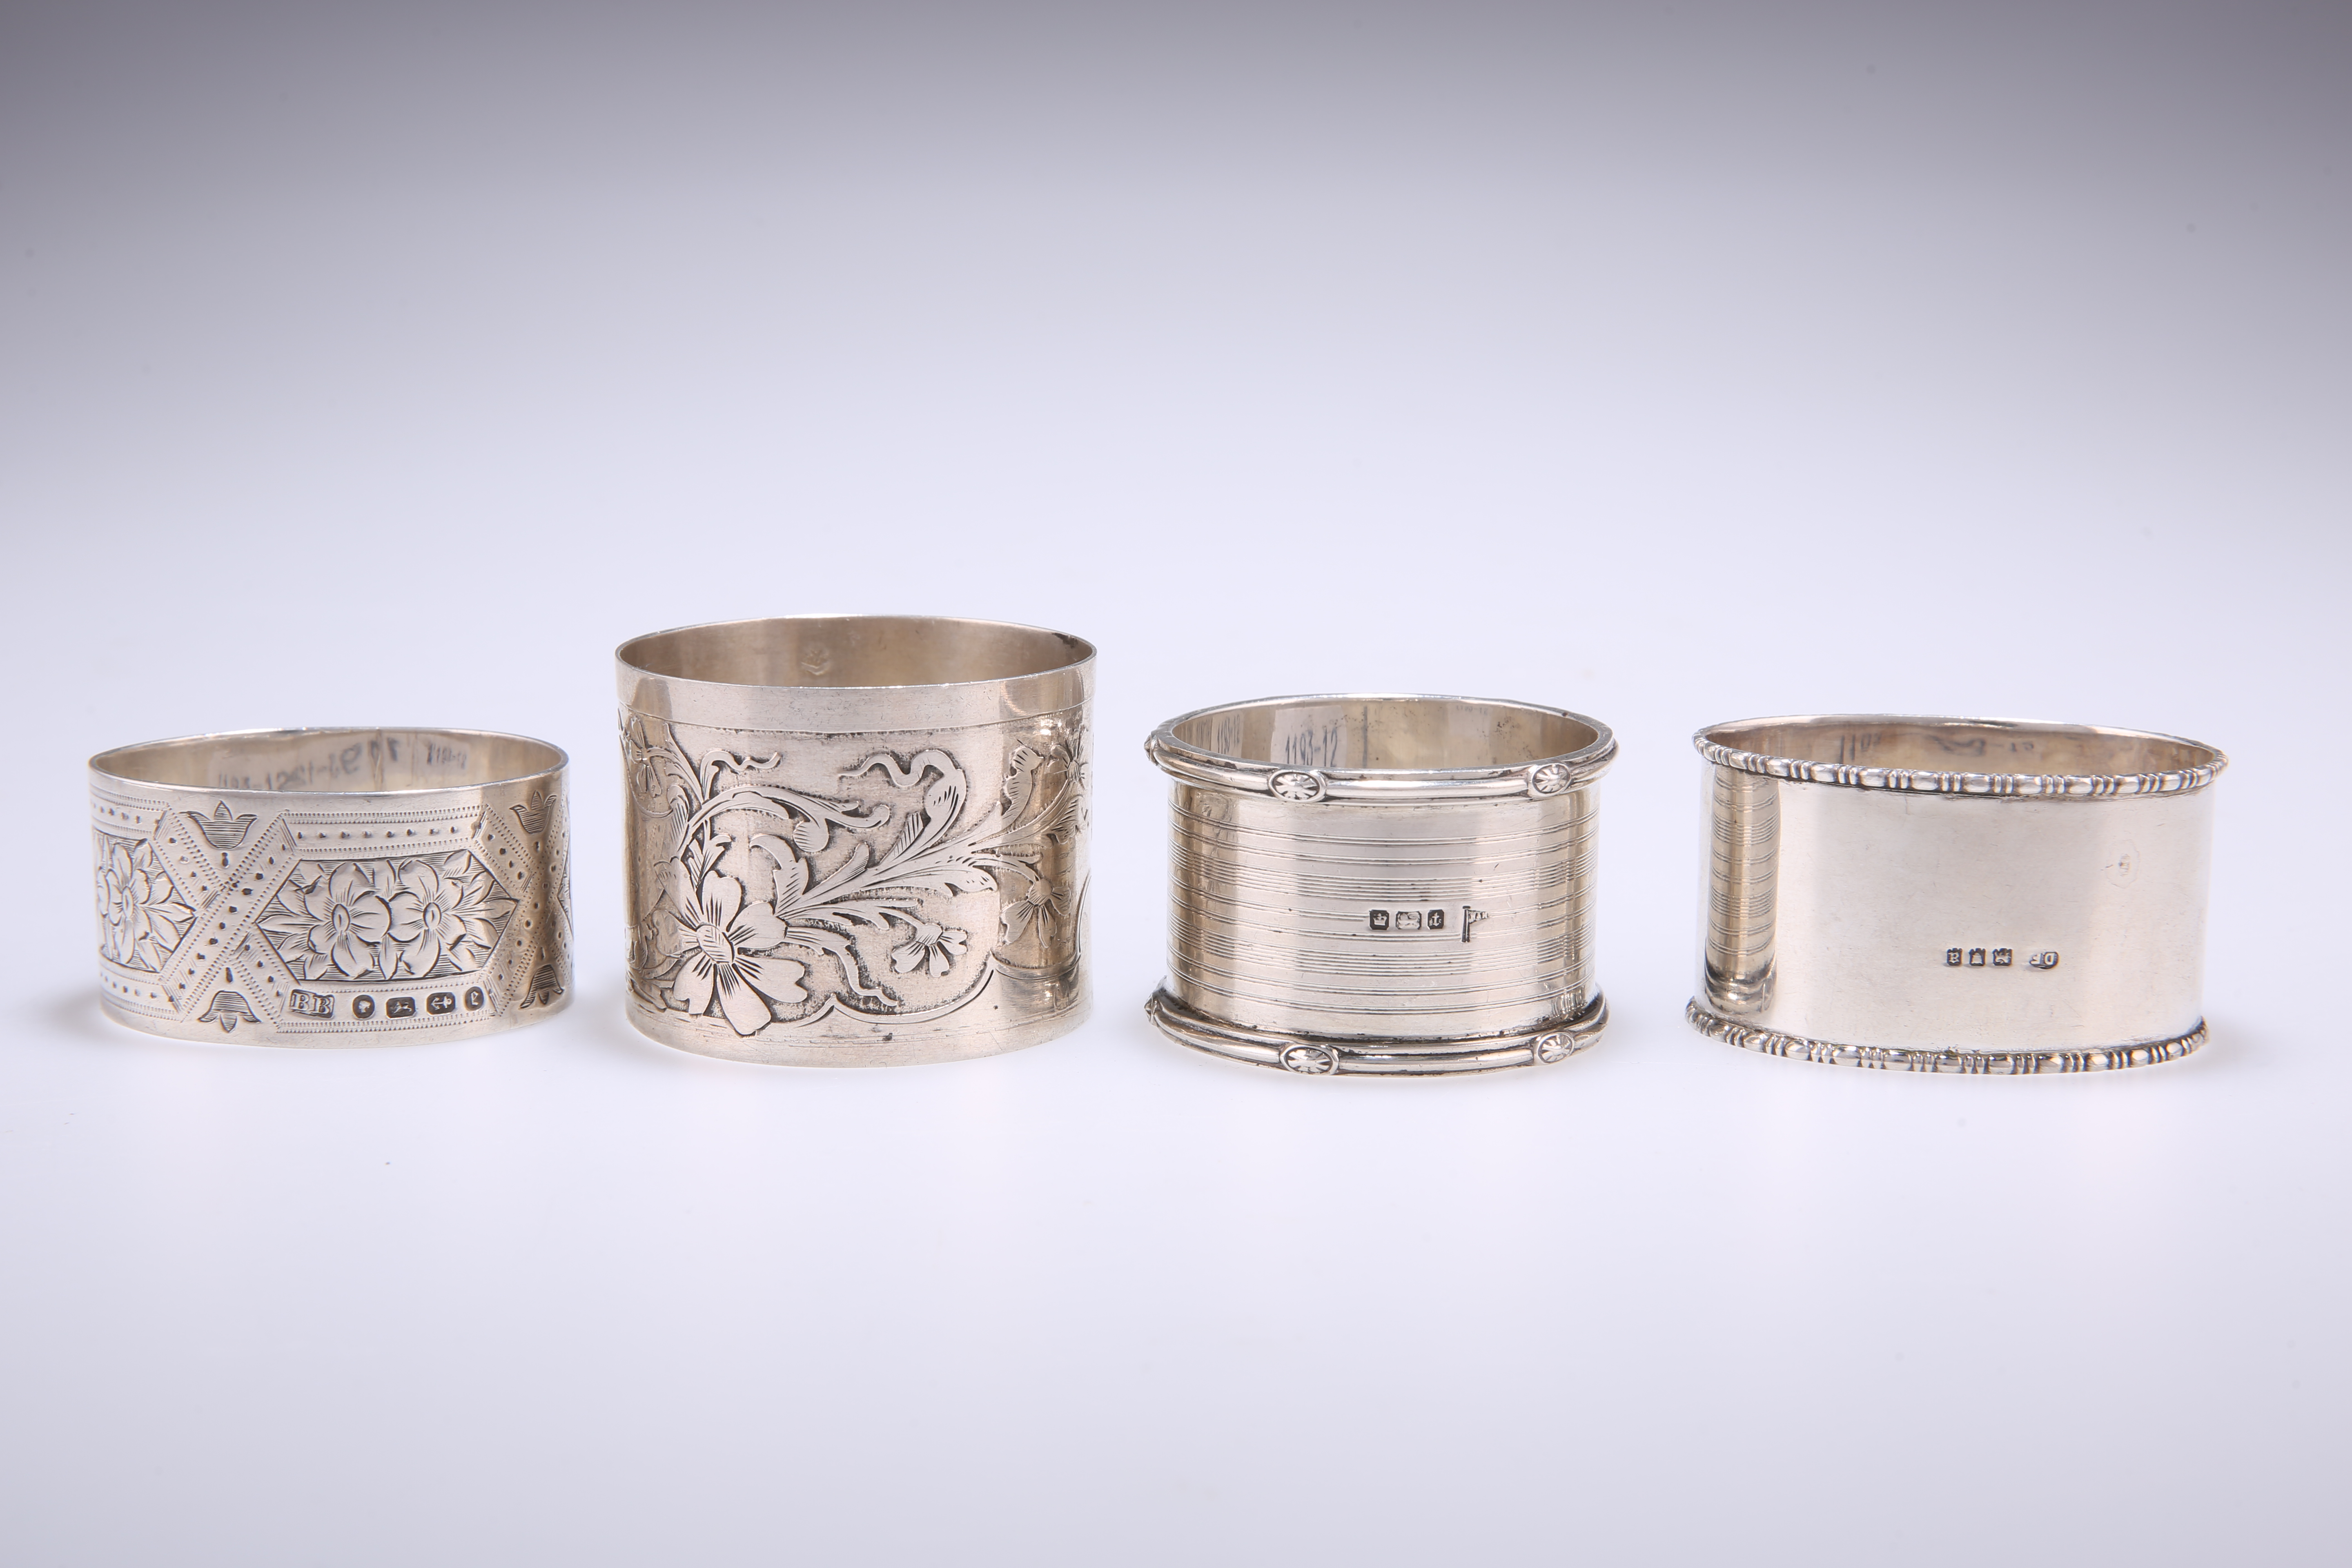 A SMALL COLLECTION OF SILVER NAPKIN RINGS